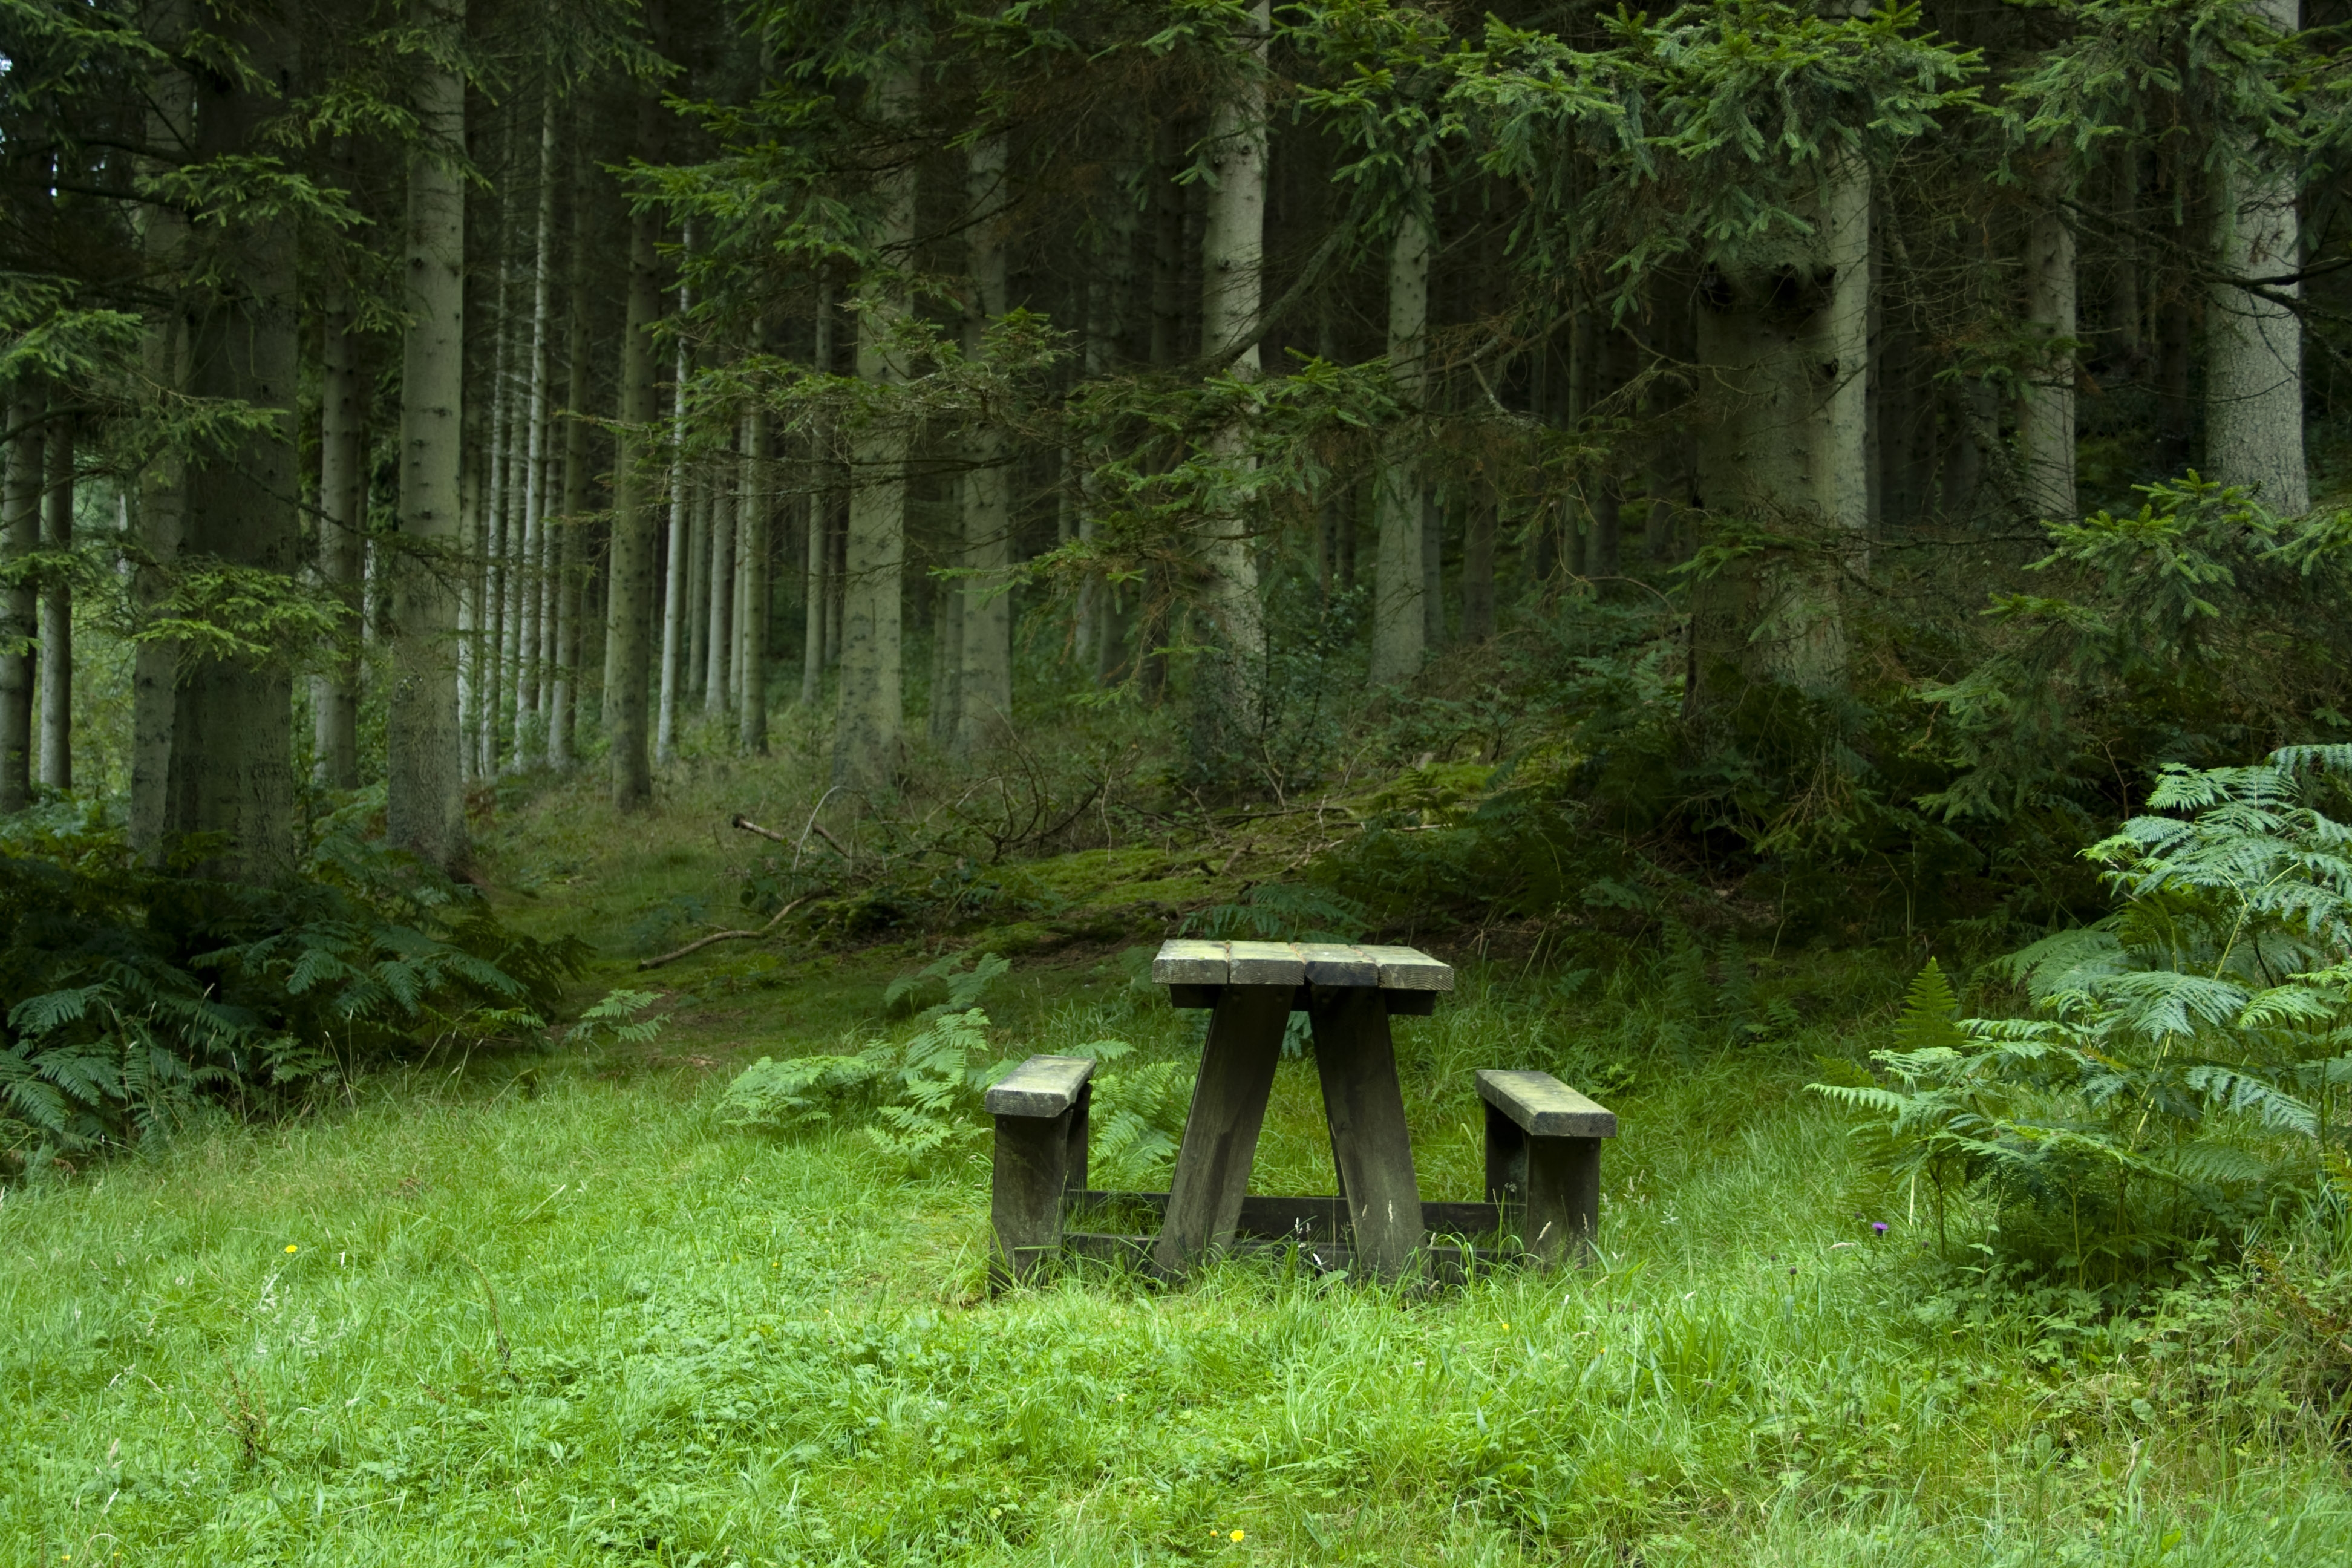 table, benches, landscape, nature, forest, polyana, glade, side table cellphone